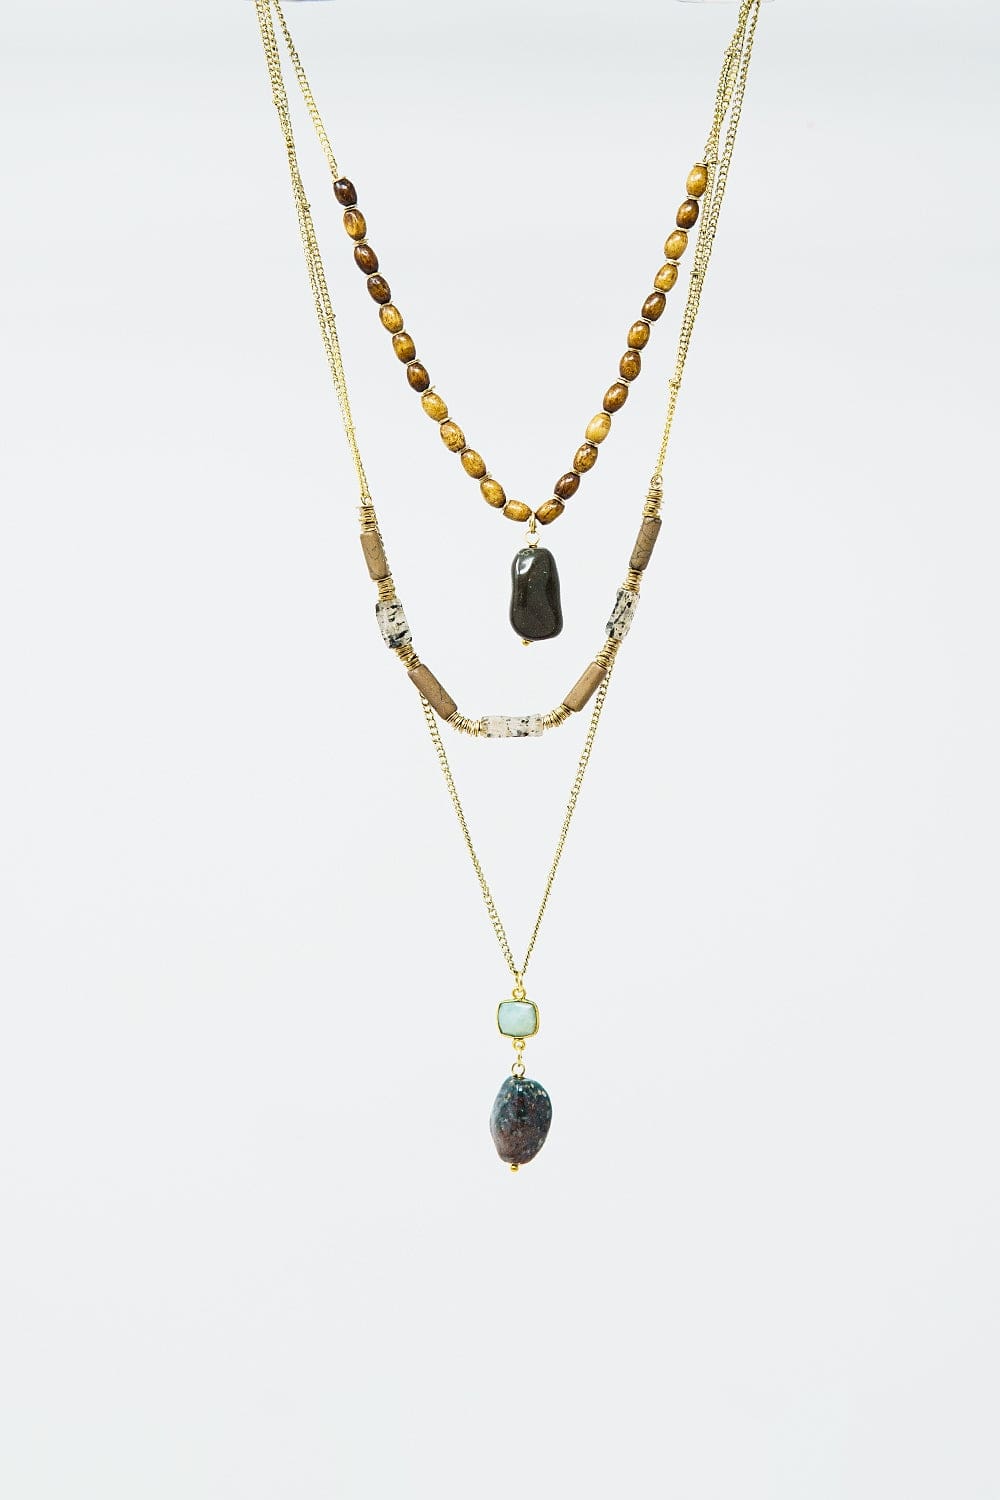 Q2 Women's Necklace One Size / Gold Ethnic 3 In 1 Necklace With Large Stones And Natural Beads